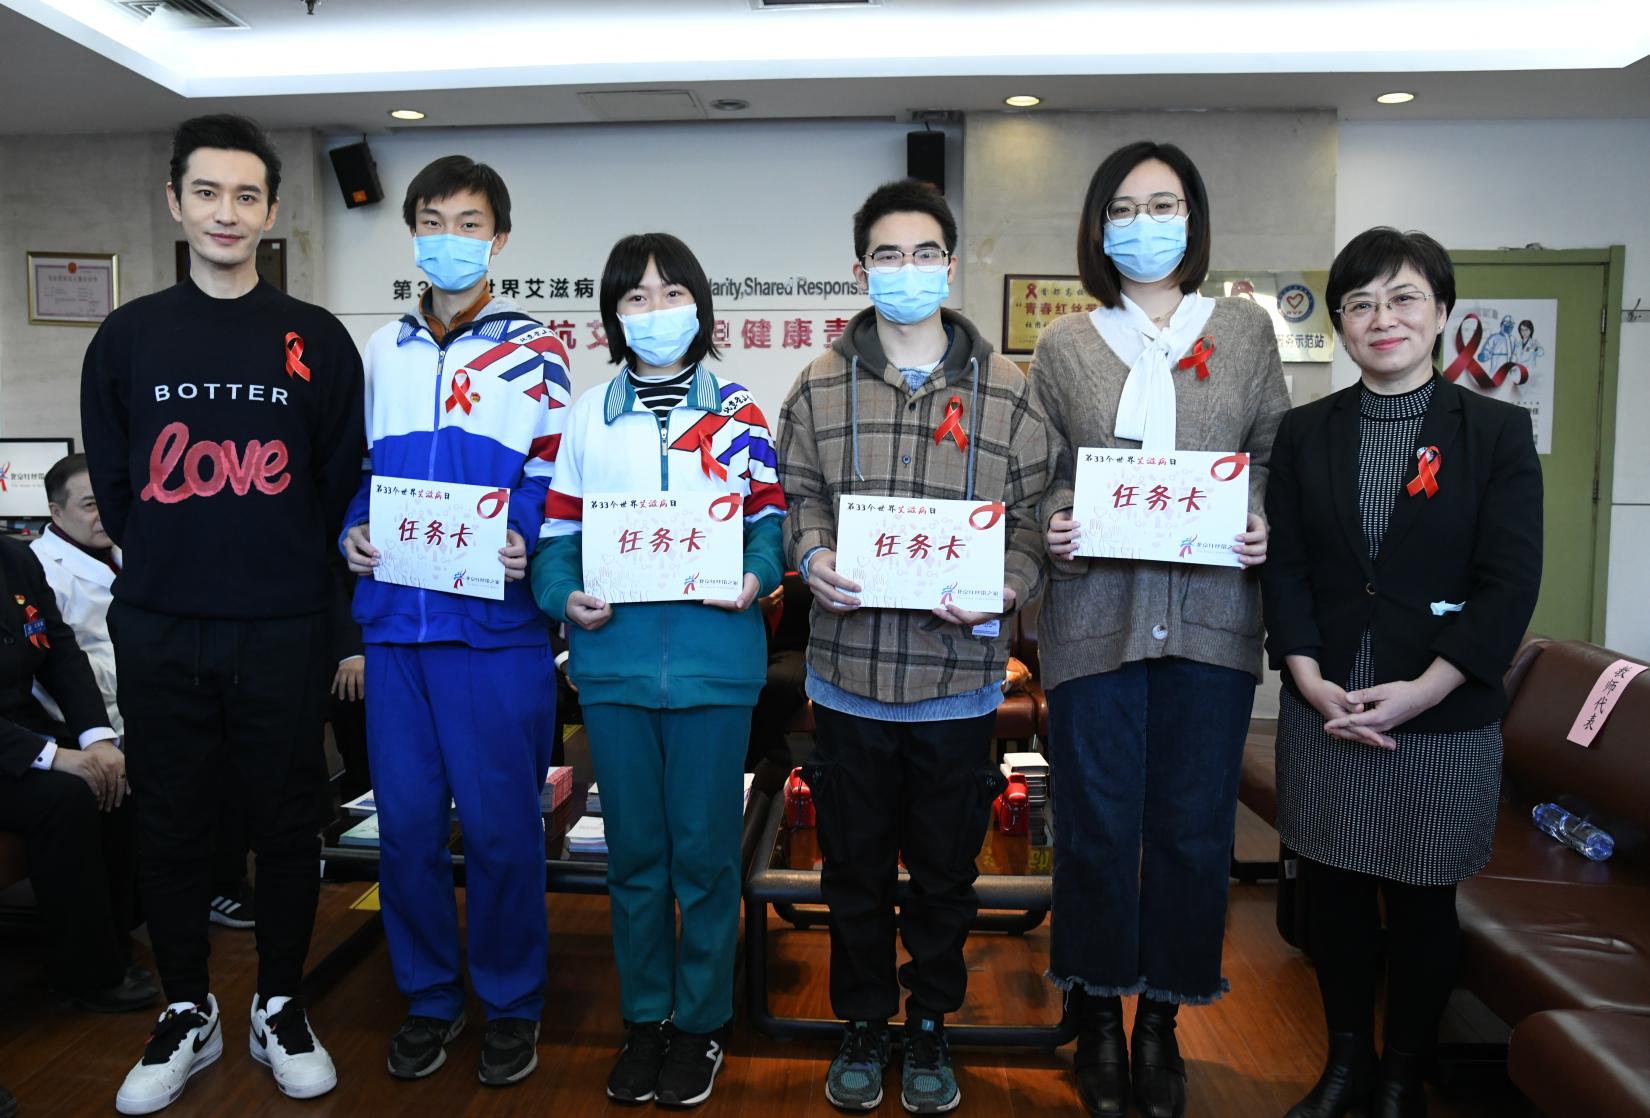 Dr. Zhou Kai and UNAIDS Goodwill Ambassador for China, Huang Xiaoming, visiting Beijing Ditan Hospital around World AIDS Day 2020, paying tribute to medical workers and volunteers for providing undisrupted HIV services and encouraging young students to become volunteers for HIV prevention. 